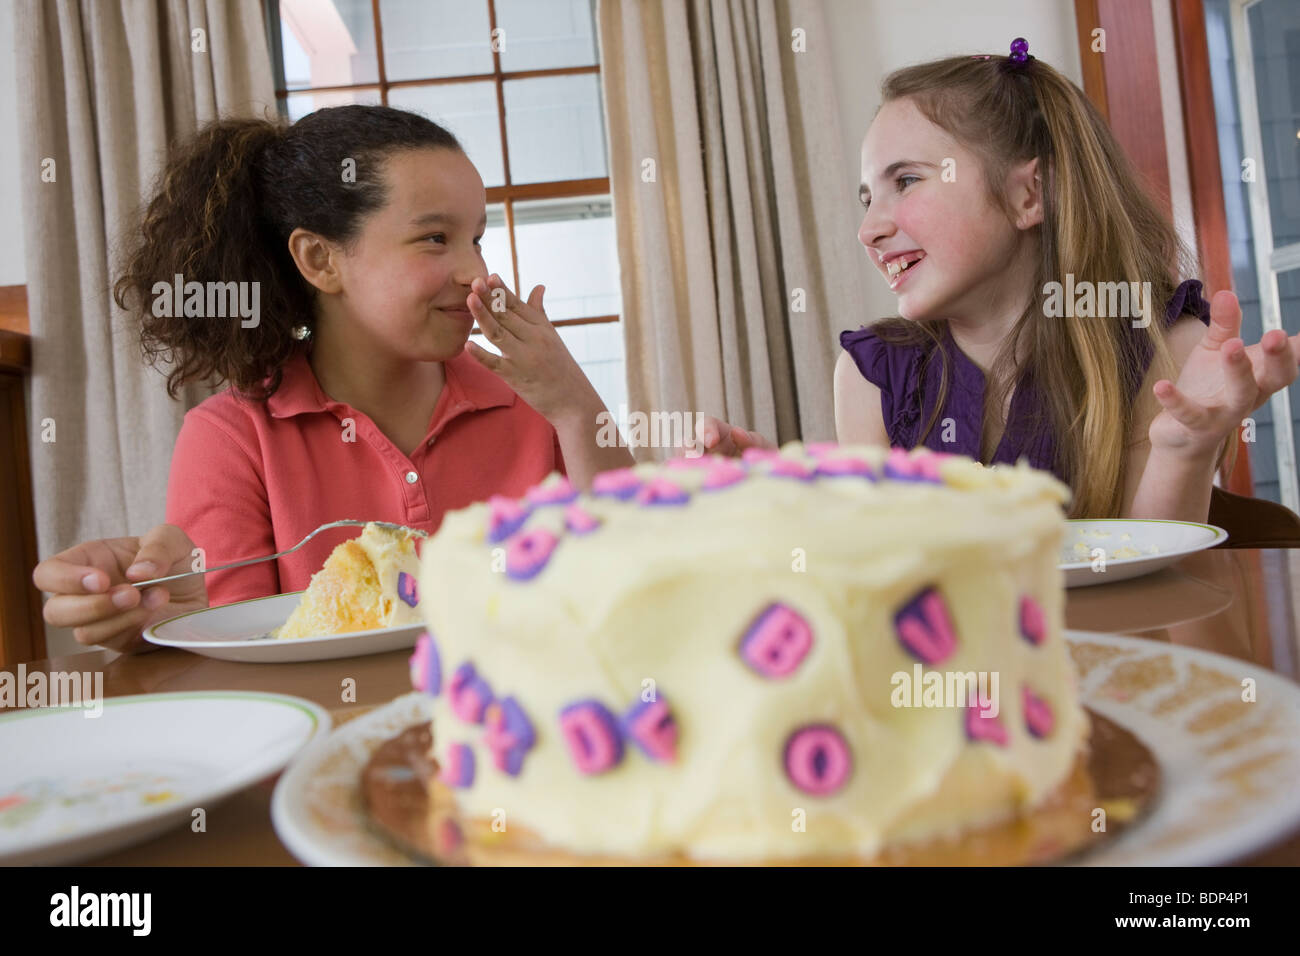 Two girls eating birthday cake and smiling Stock Photo